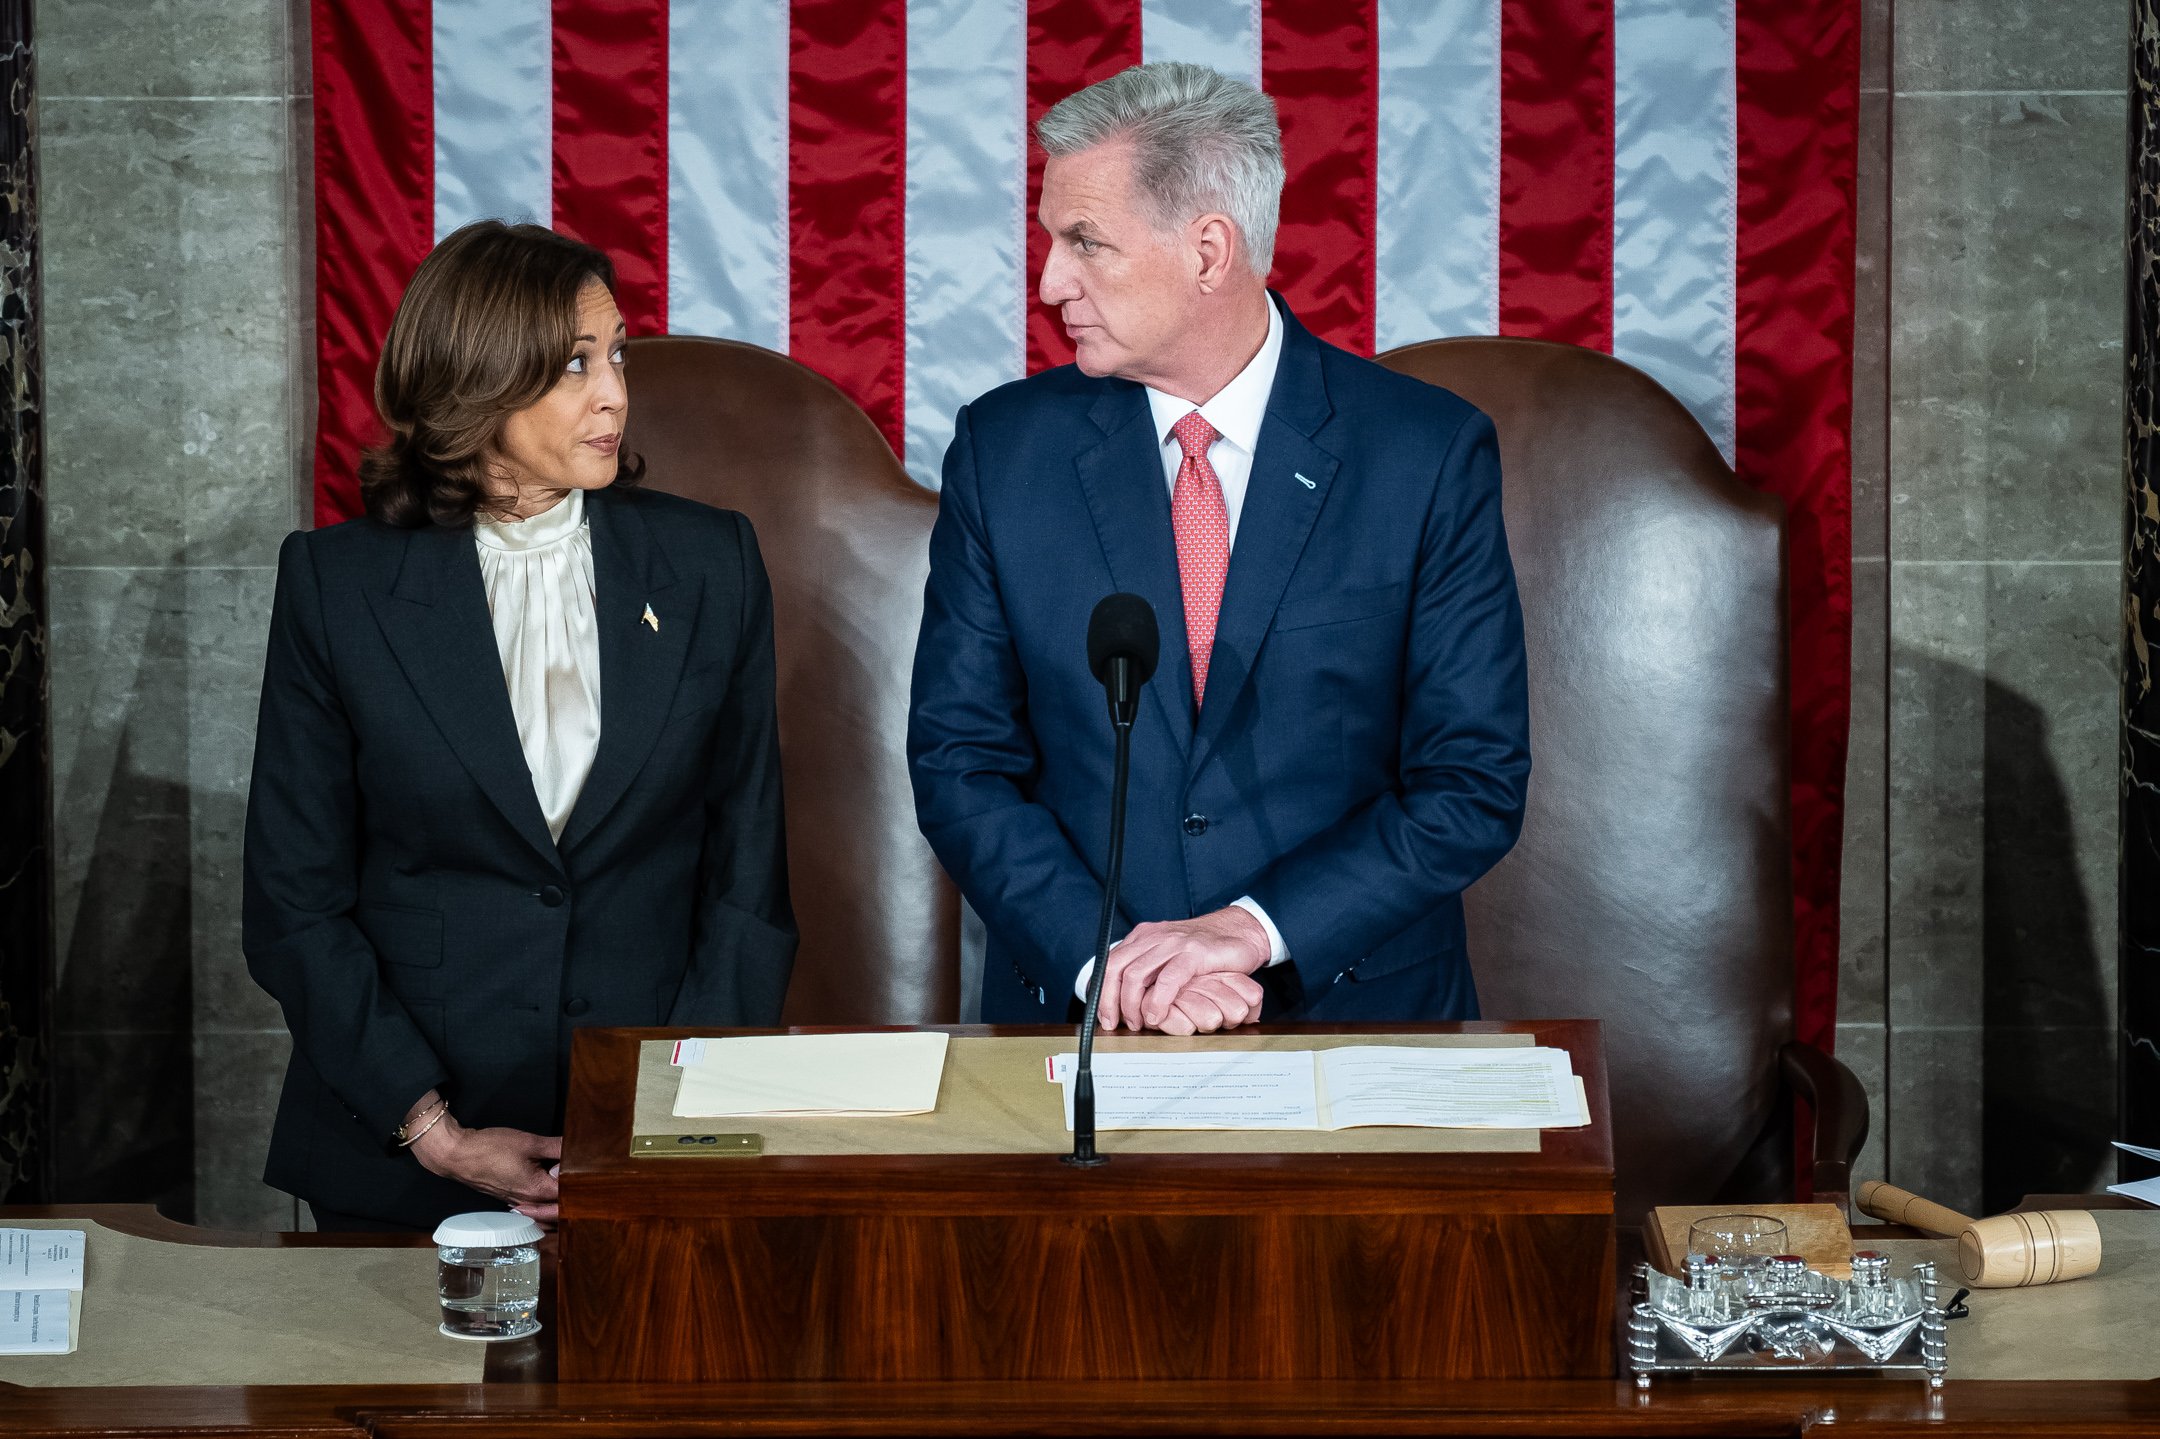  Vice President Kamala Harris and Speaker of the House Kevin McCarthy (R-CA) speak behind the dais before Prime Minister of India Narendra Modi’s Address to a Joint Session of Congress in the House Chamber, at the U.S. Capitol, in Washington, D.C., o